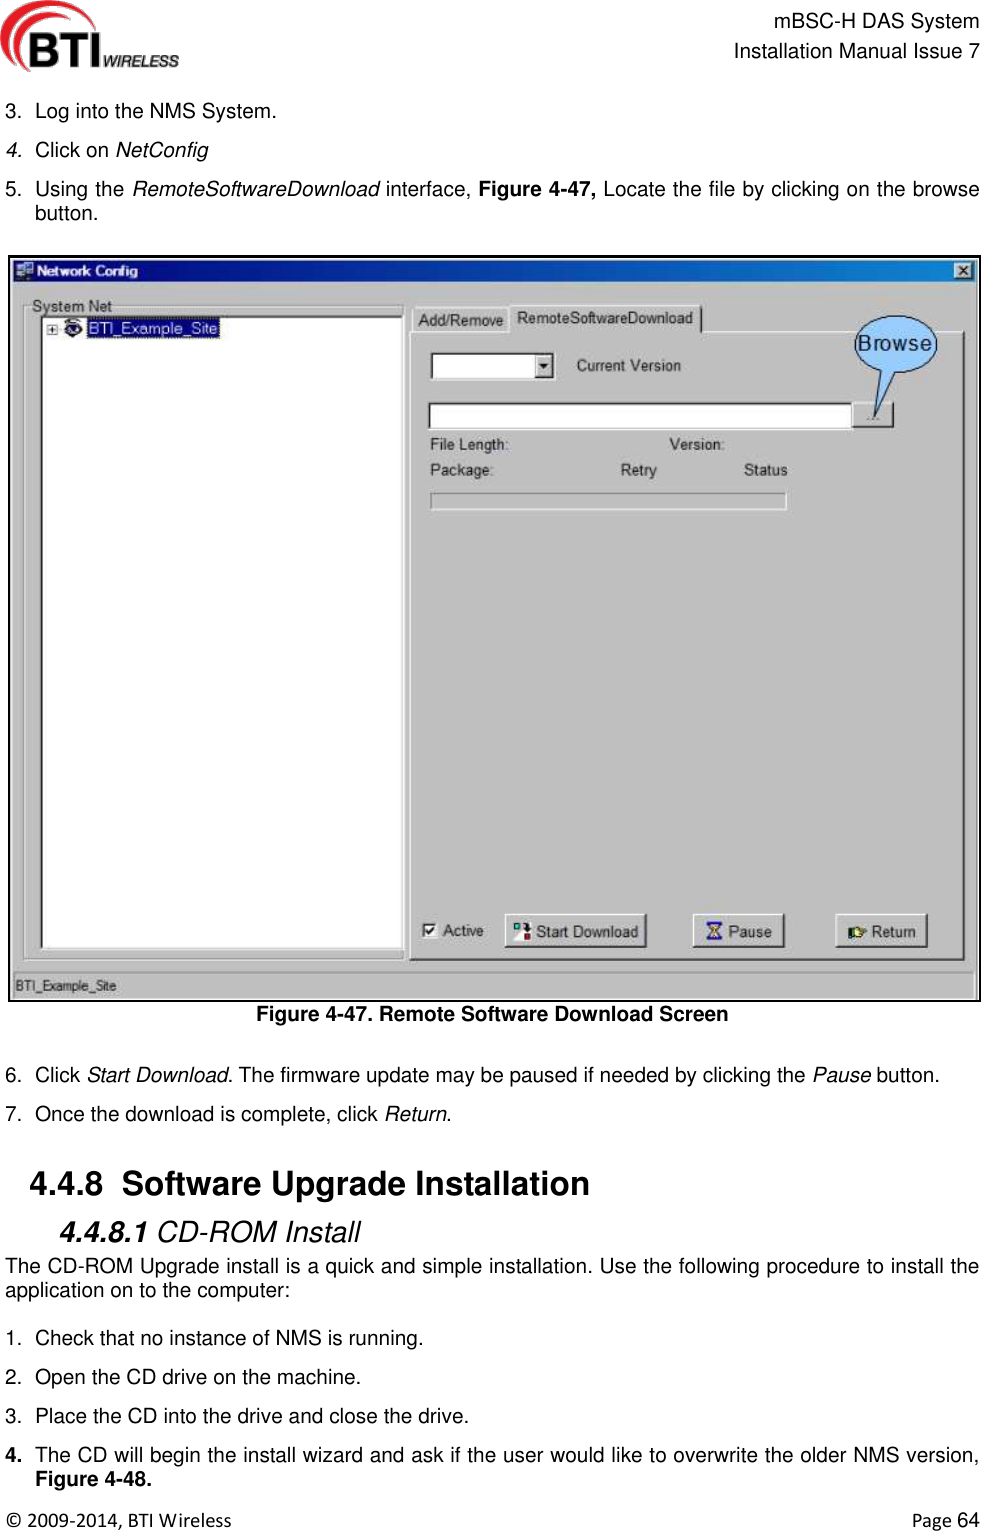                                                   mBSC-H DAS System   Installation Manual Issue 7  ©  2009-2014, BTI Wireless    Page 64  3.  Log into the NMS System. 4. Click on NetConfig 5.  Using the RemoteSoftwareDownload interface, Figure 4-47, Locate the file by clicking on the browse button. Figure 4-47. Remote Software Download Screen  6.  Click Start Download. The firmware update may be paused if needed by clicking the Pause button. 7.  Once the download is complete, click Return.   4.4.8  Software Upgrade Installation  4.4.8.1 CD-ROM Install The CD-ROM Upgrade install is a quick and simple installation. Use the following procedure to install the application on to the computer:  1.  Check that no instance of NMS is running. 2.  Open the CD drive on the machine. 3.  Place the CD into the drive and close the drive. 4. The CD will begin the install wizard and ask if the user would like to overwrite the older NMS version, Figure 4-48. 